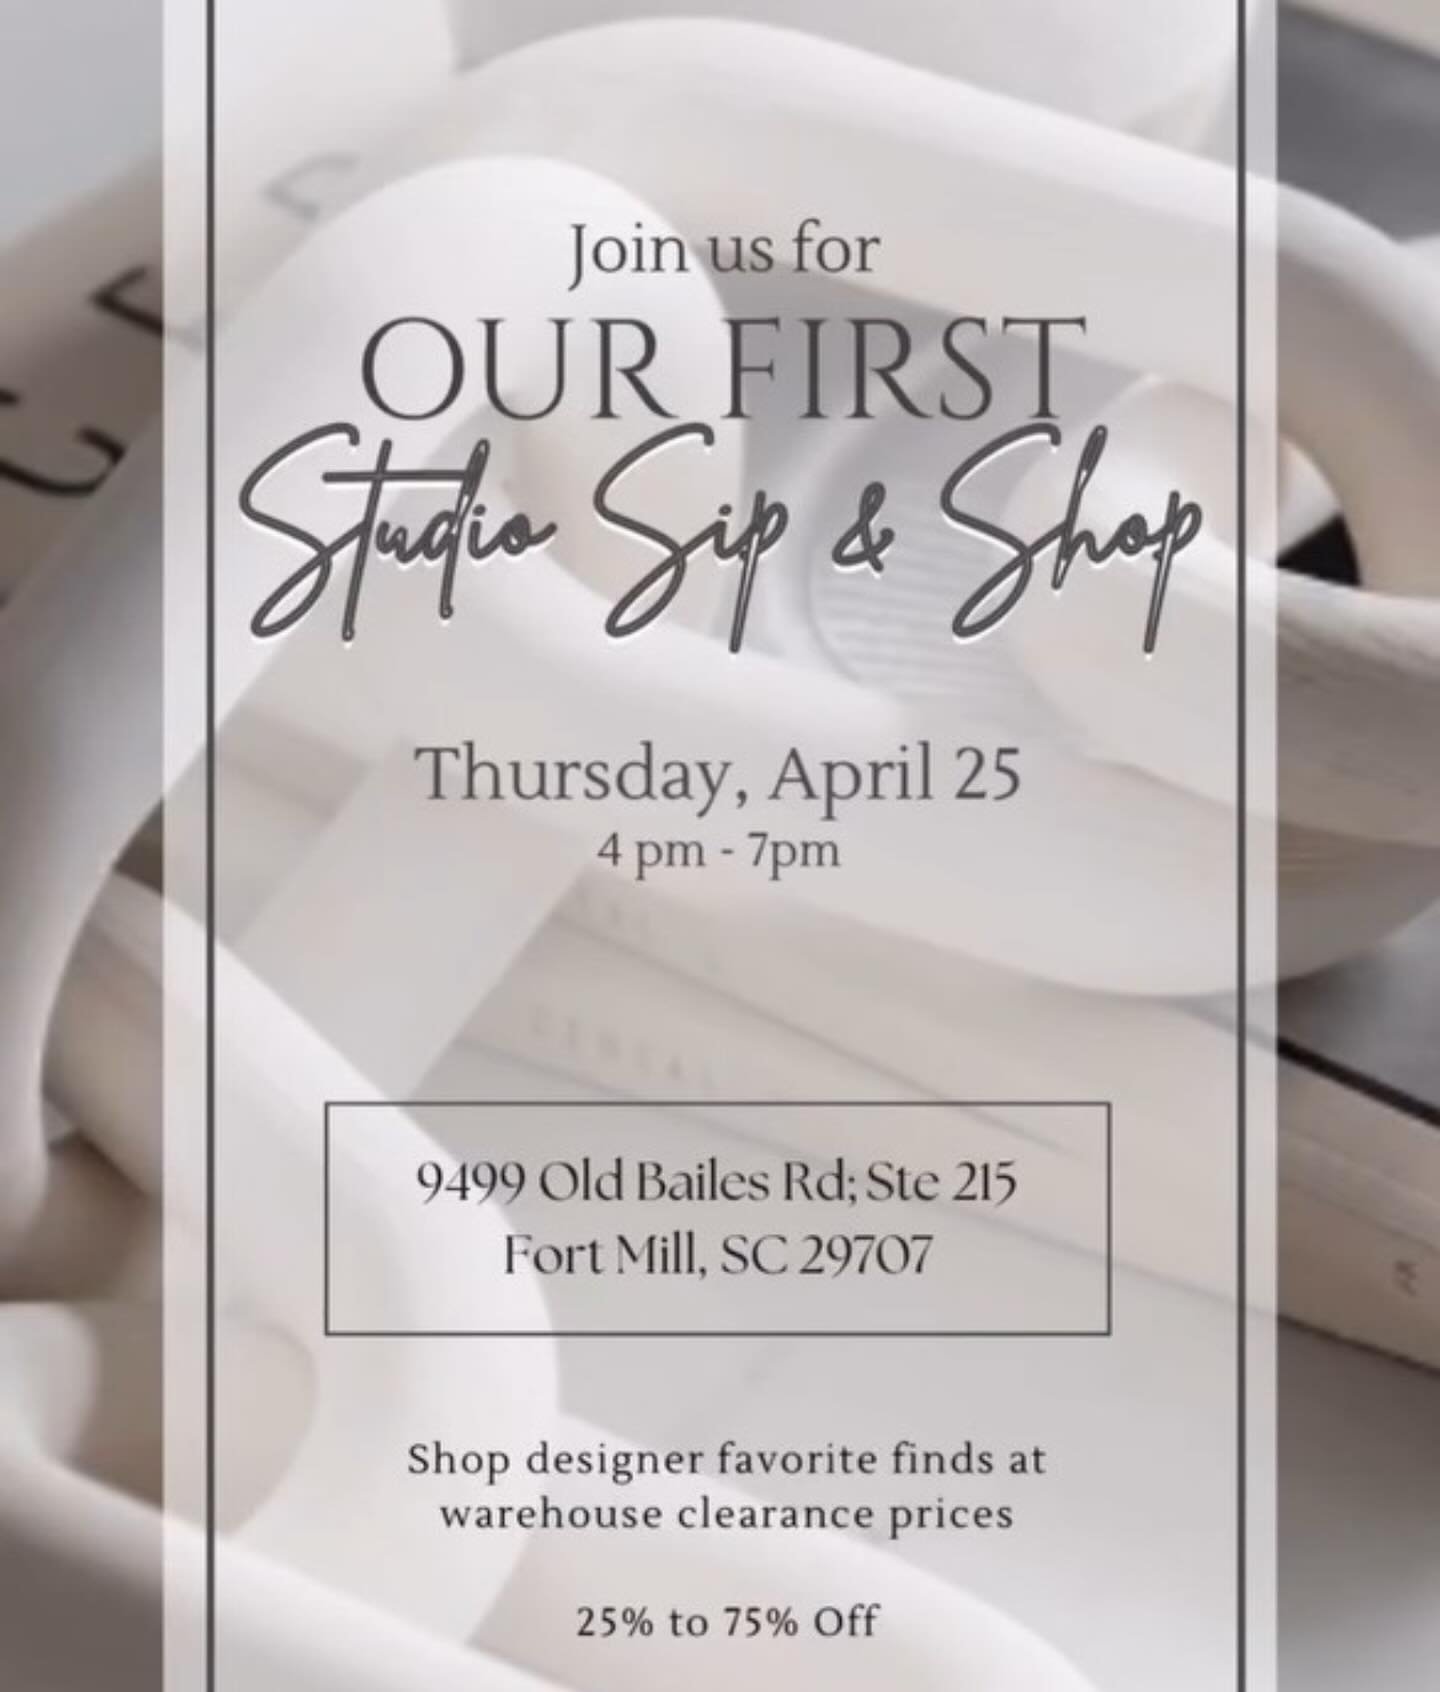 Join us next week for our first ever Sip &amp; Shop event! 🥂

Together with @tylerinteriorsdesign, @valentindesignco and @handleyhomeinteriors, we are excited to offer the public our favorite designer accessories at deeply discounted prices to make 